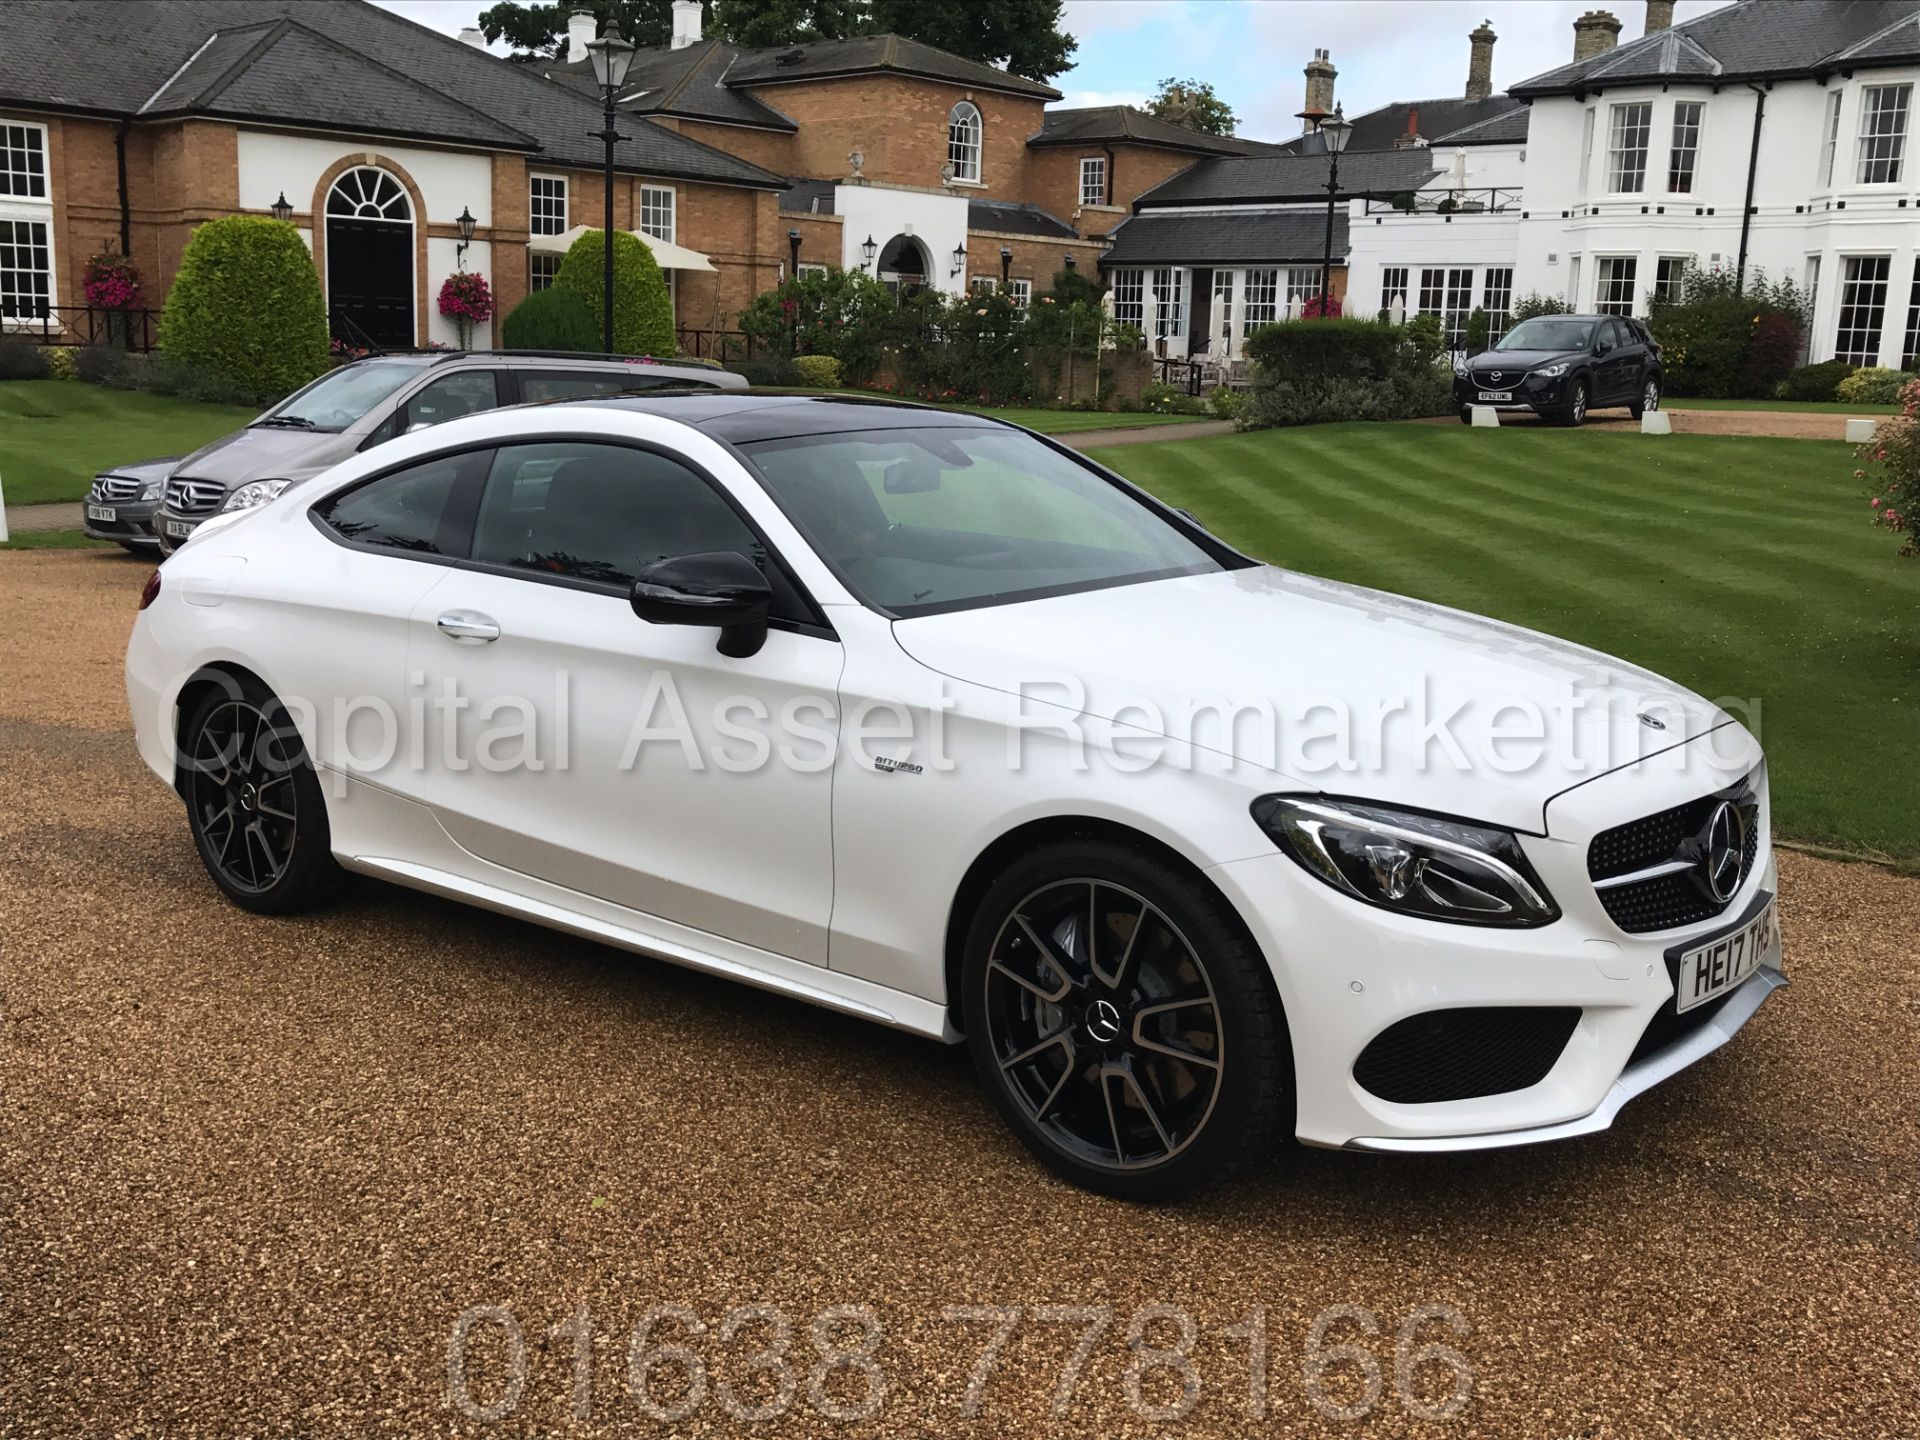 MEREDES-BENZ C43 AMG PREMIUM '4 MATIC' COUPE (2017) '9-G AUTO - LEATHER - SAT NAV' **FULLY LOADED** - Image 19 of 57